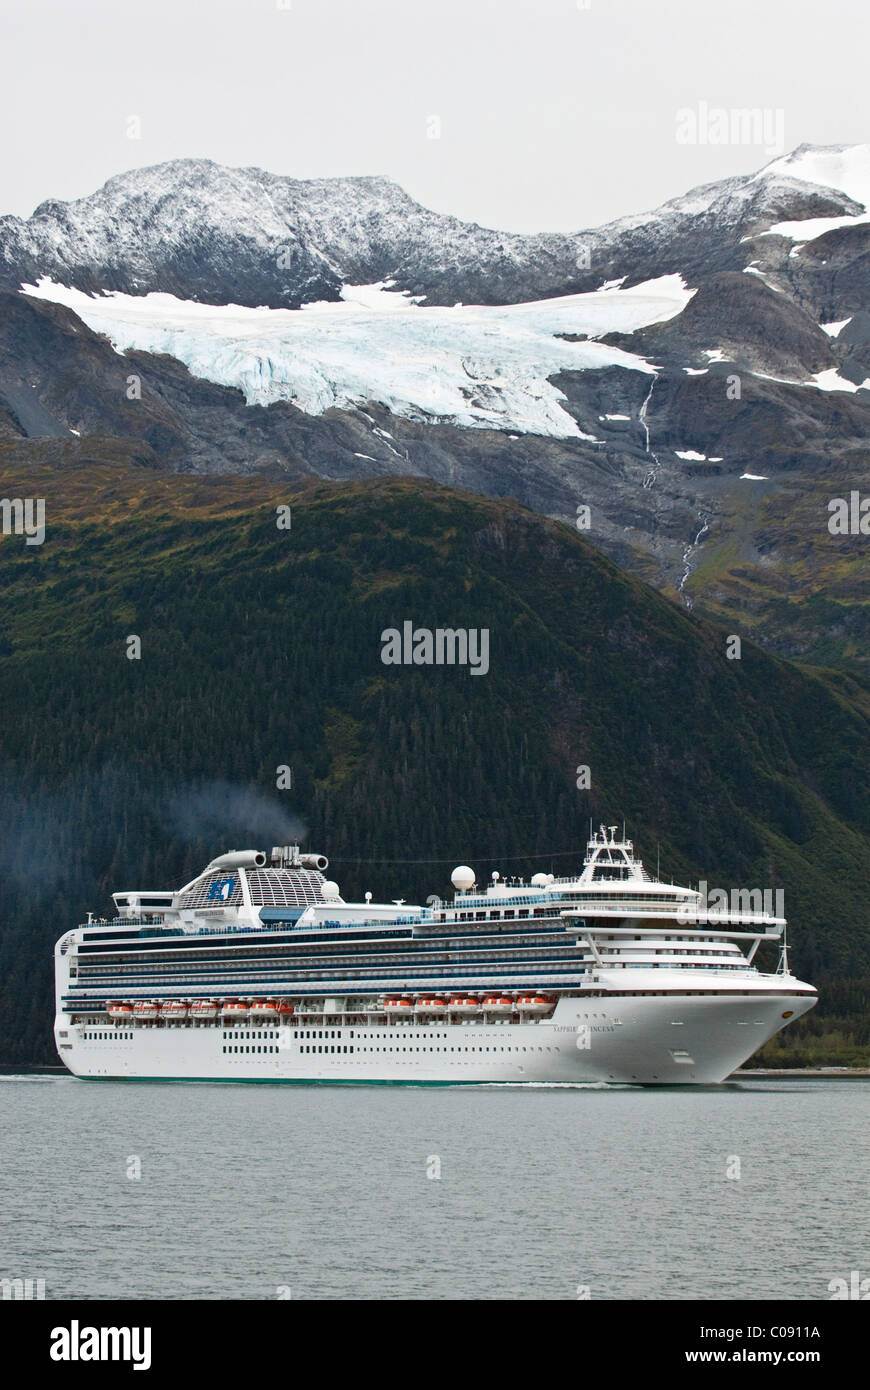 The Sapphire Princess cruise ship leaves port at Whittier bound for the open waters of the Prince William Sound, Alaska Stock Photo